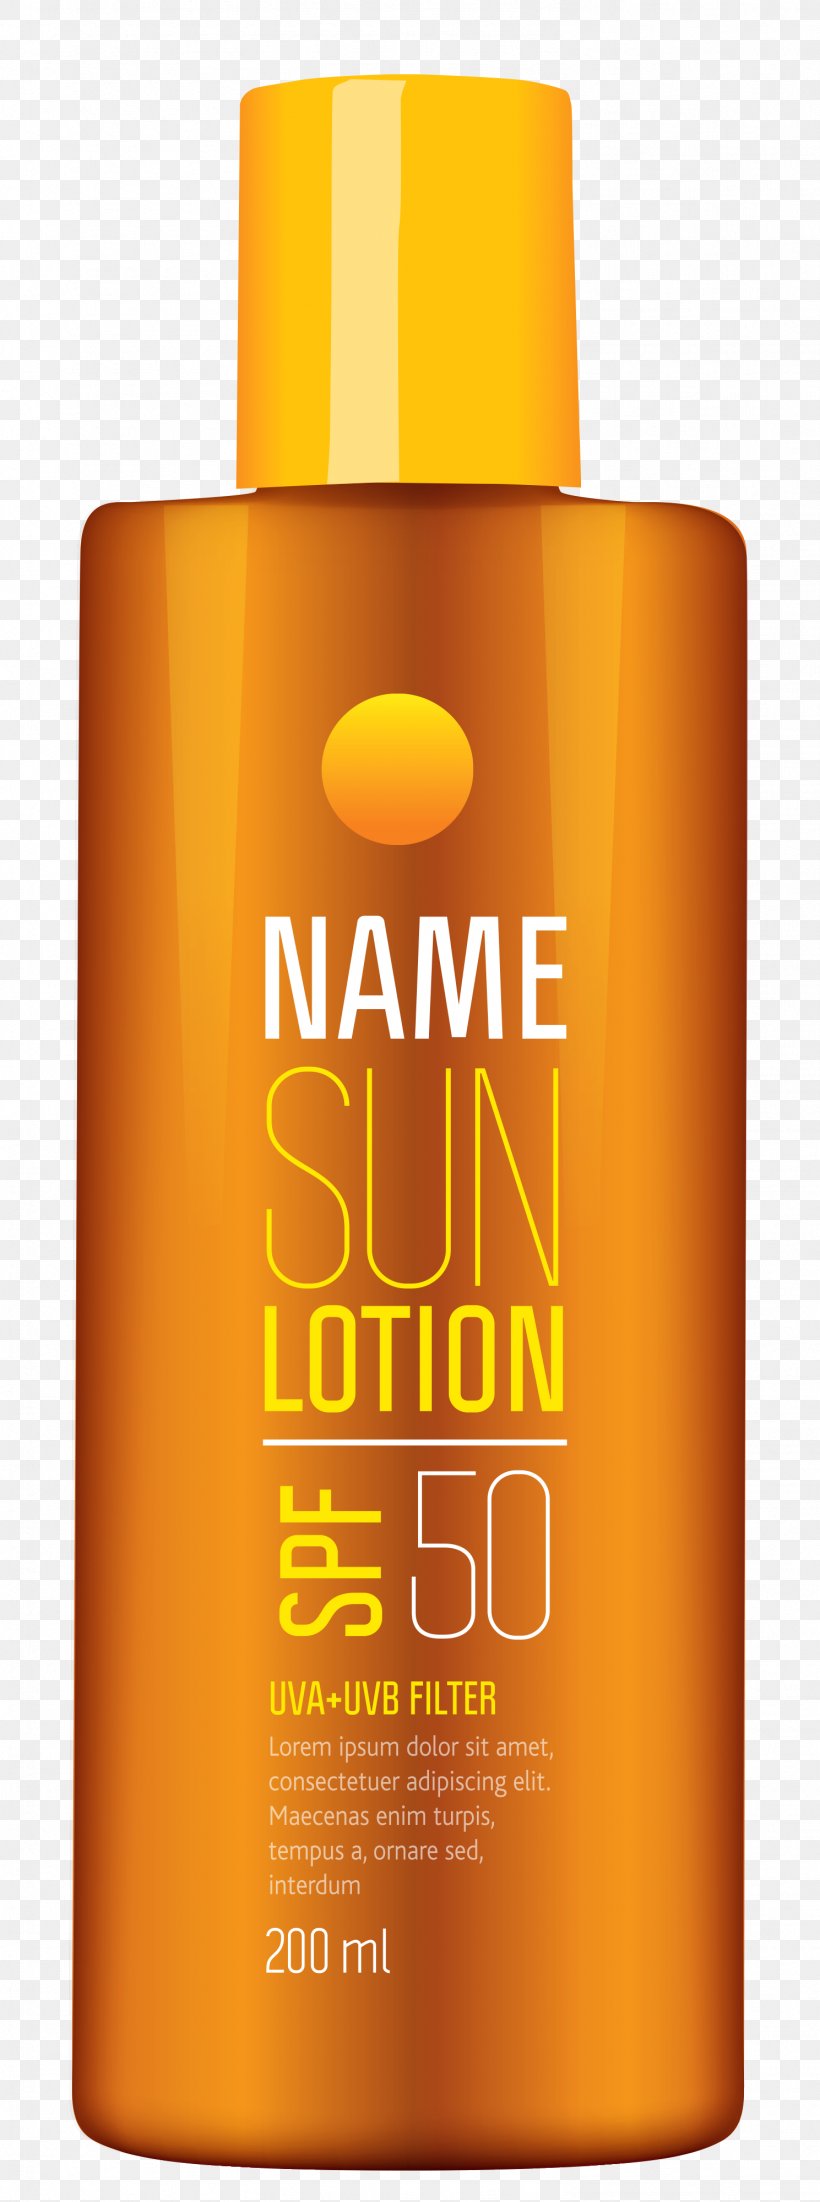 Lotion Sunscreen Lipstick Clip Art, PNG, 1489x4000px, Sunscreen, Cosmetics, Cream, Eye Liner, Face Powder Download Free